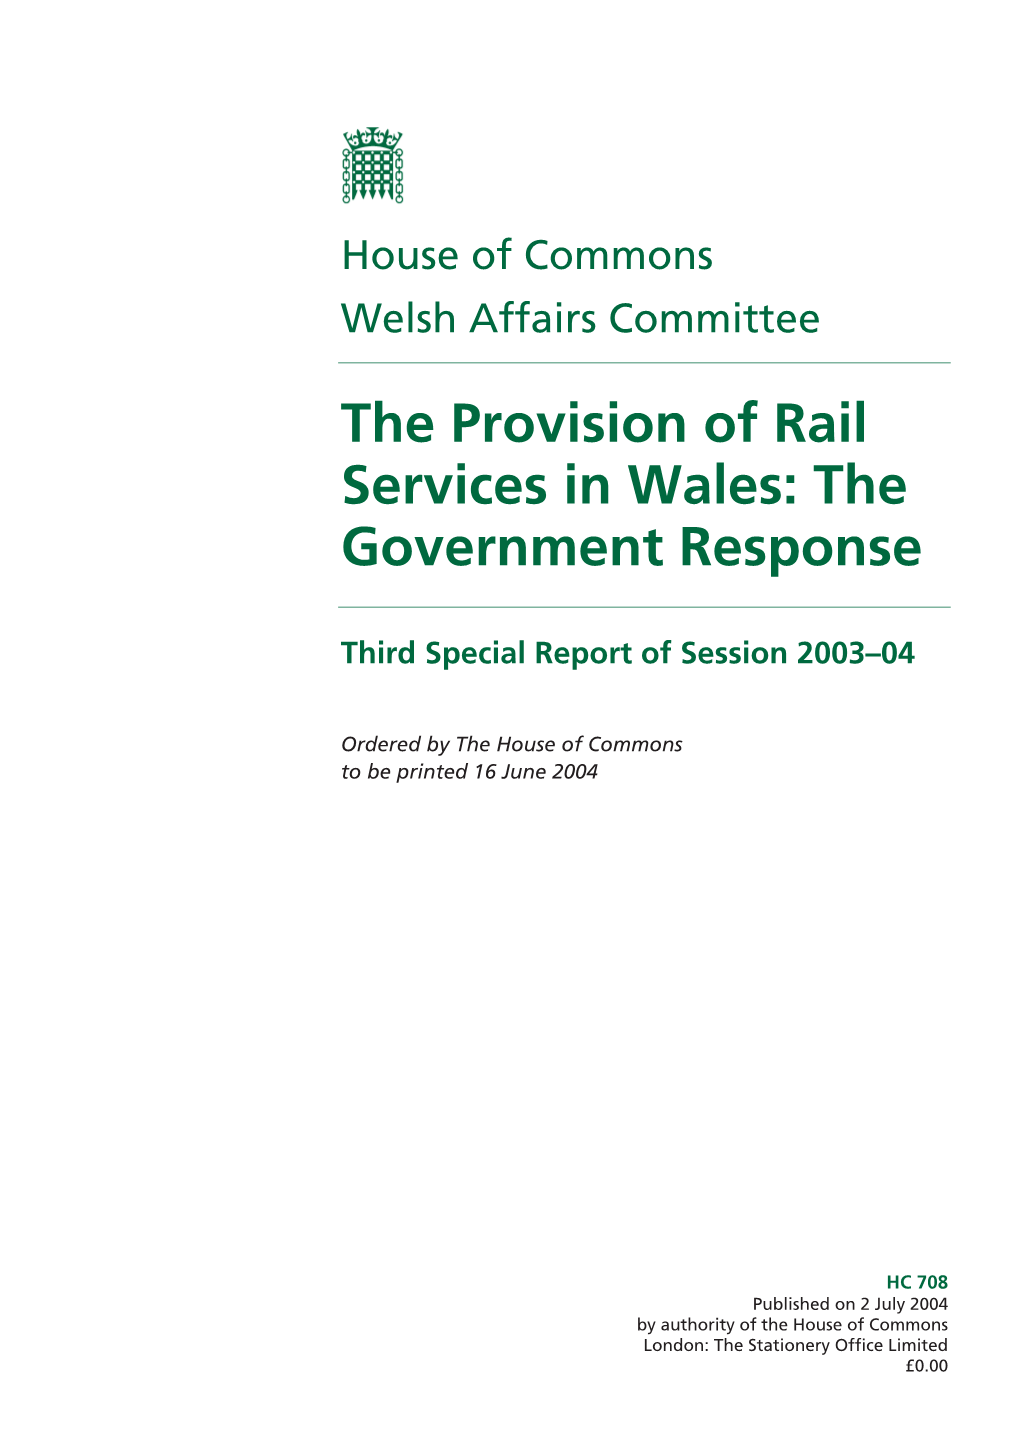 The Provision of Rail Services in Wales: the Government Response